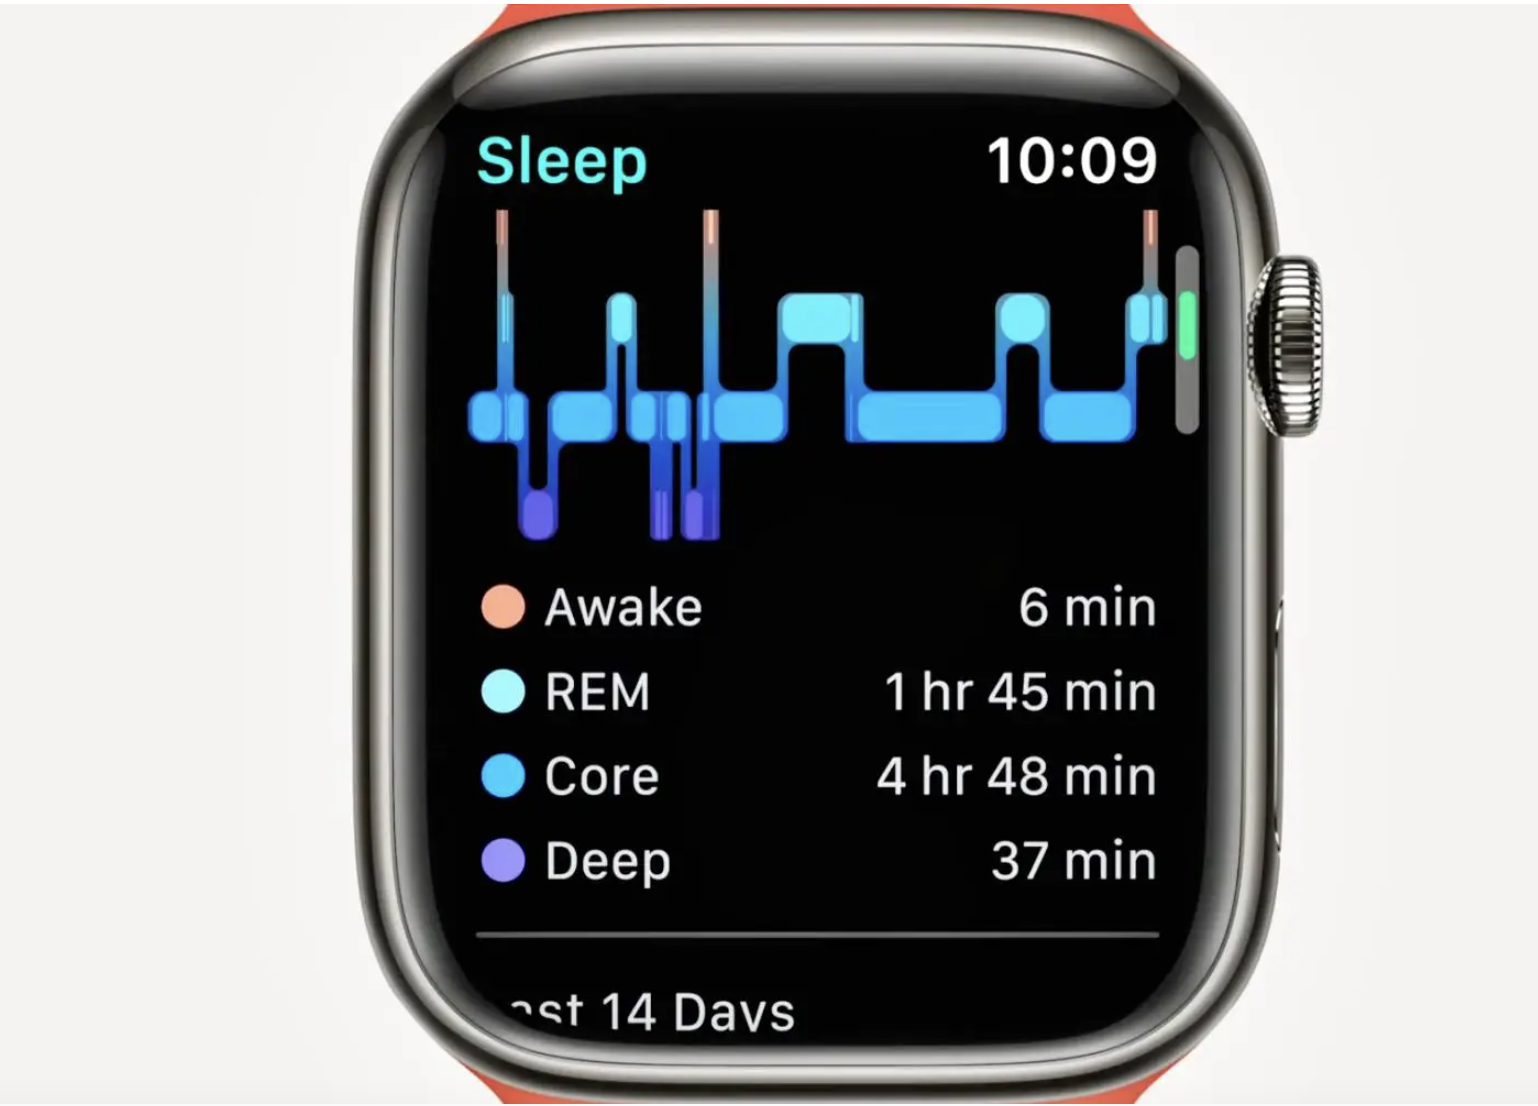 Apple Watch 0S9's New Sleep Staging: How Good Is It and What It Means for Your Sleep